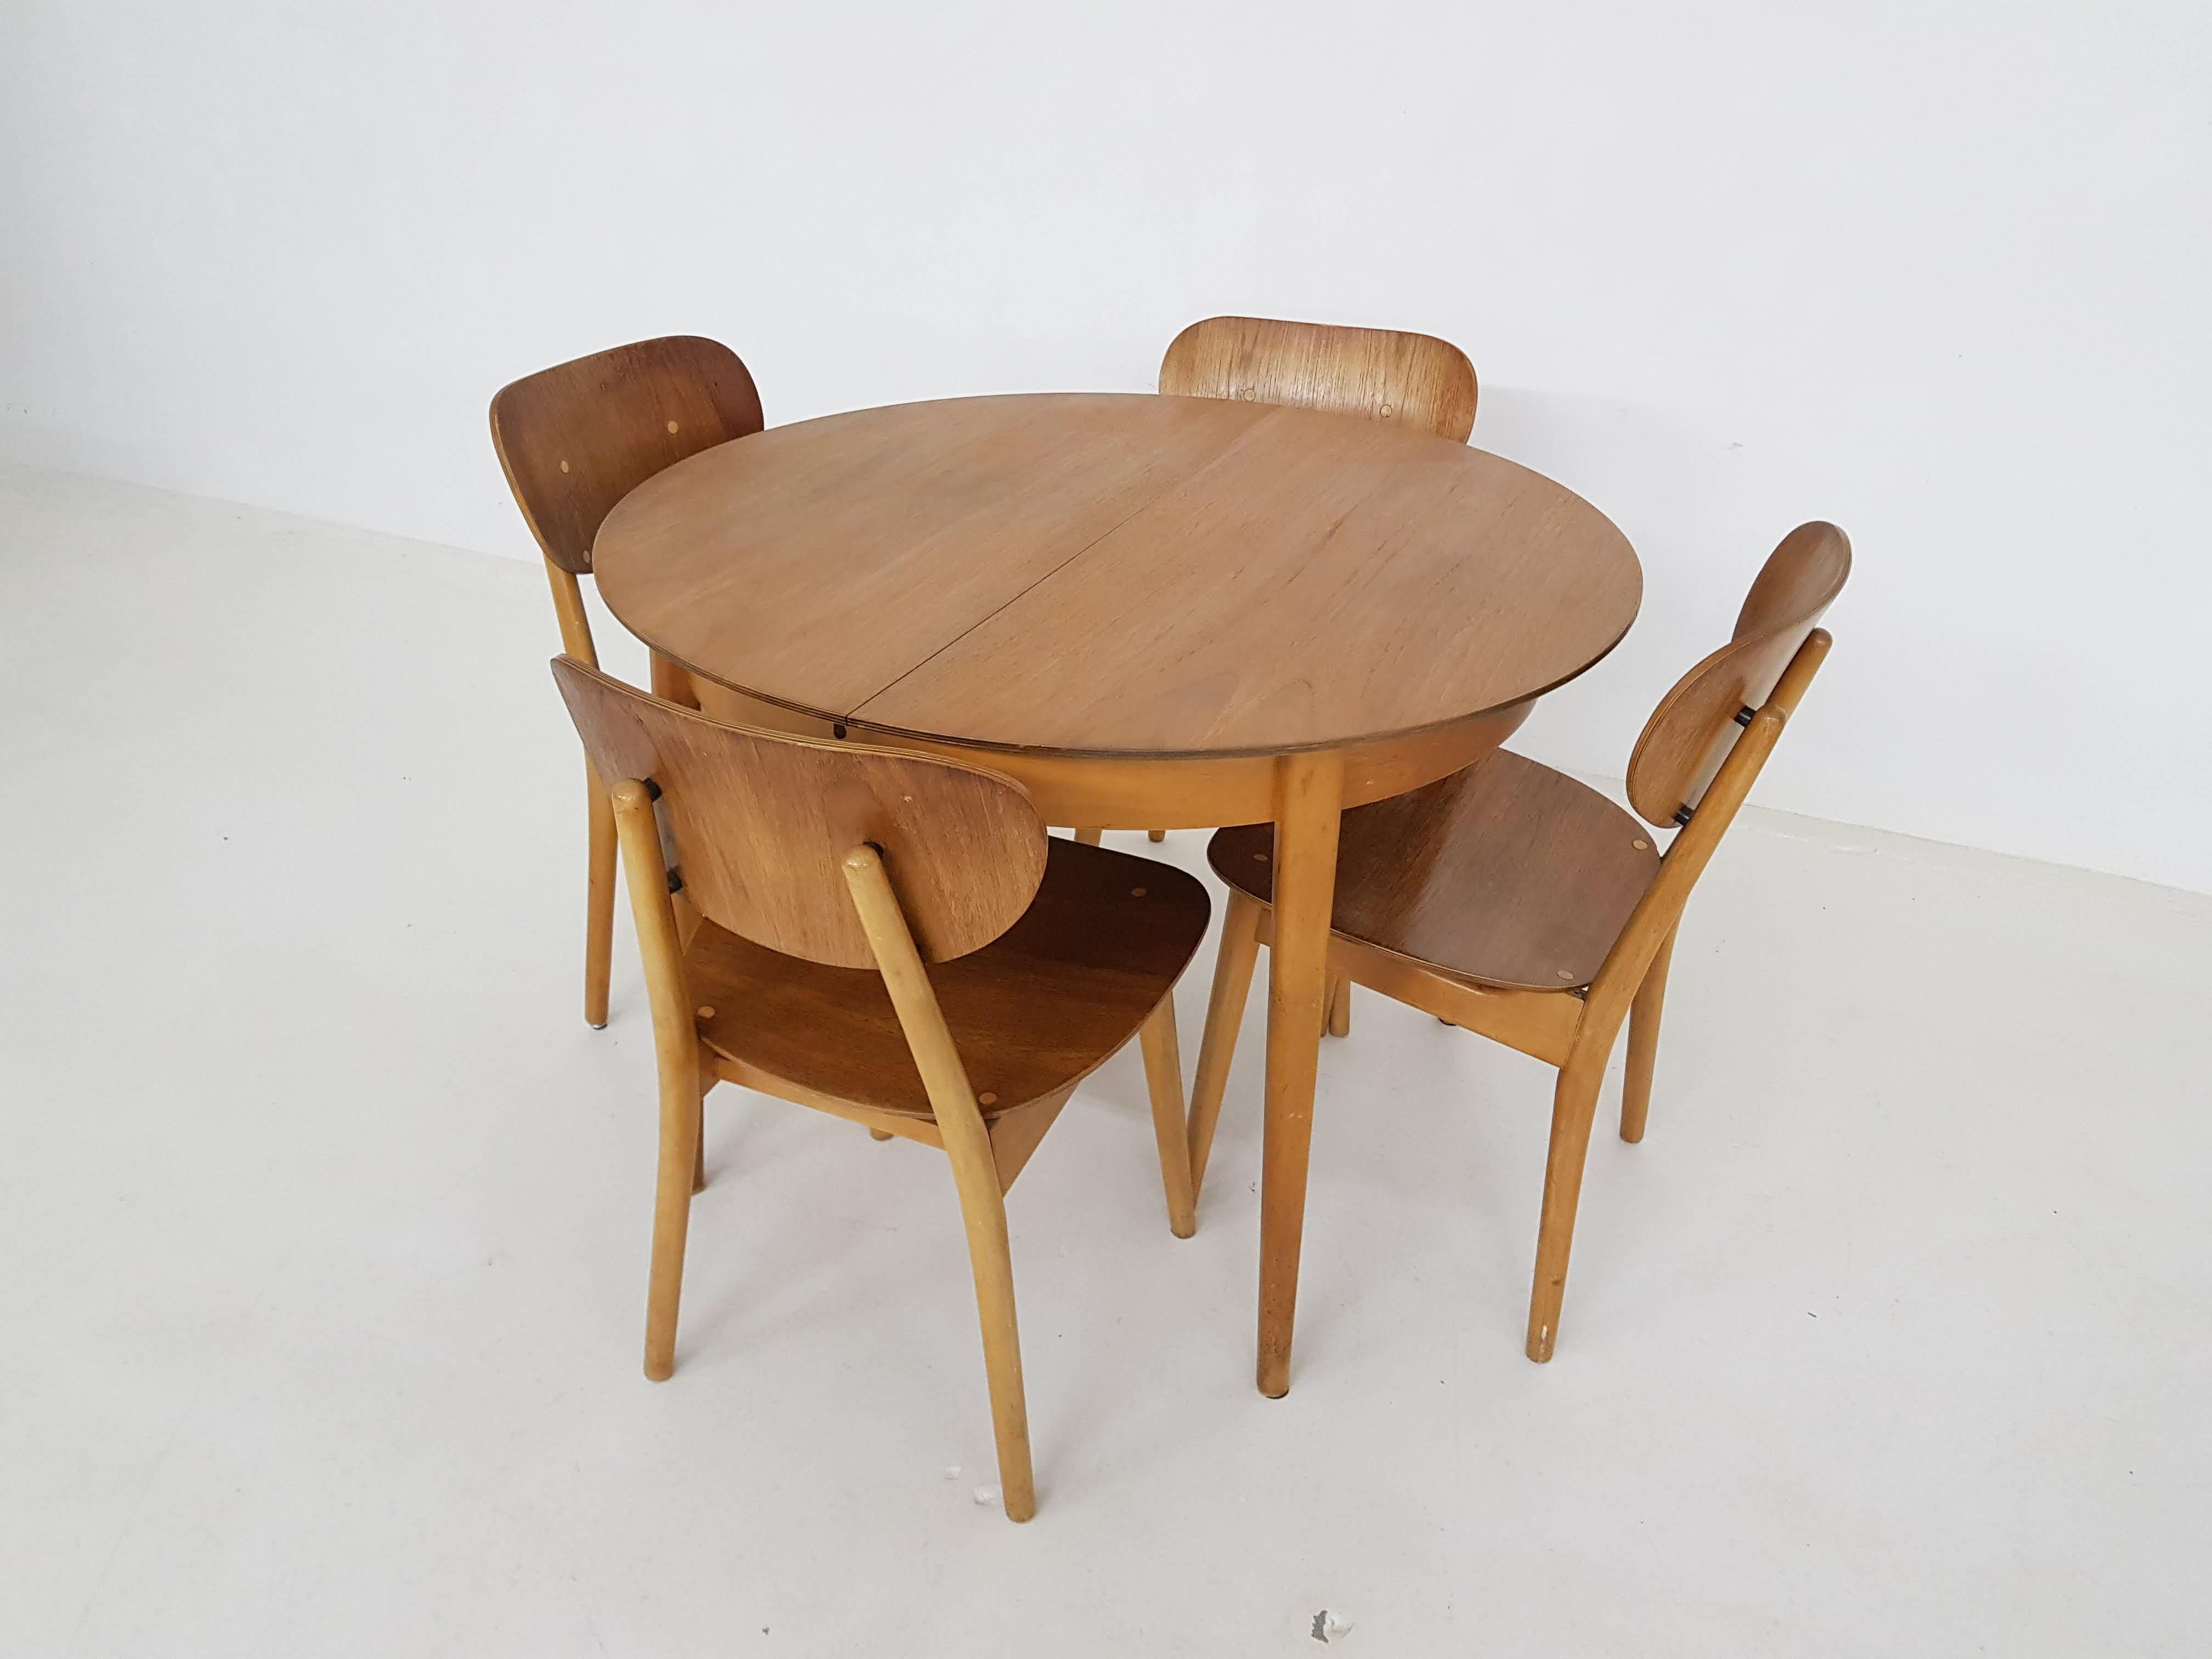 Matching dining set consisting of a TB35 table and SB11 chairs by Dutch designer Cees Braakman for UMS Pastoe.

Cees Braakman was a Dutch furniture designer who worked for UMS Pastoe in the mid-century. He designed many beautiful pieces with the